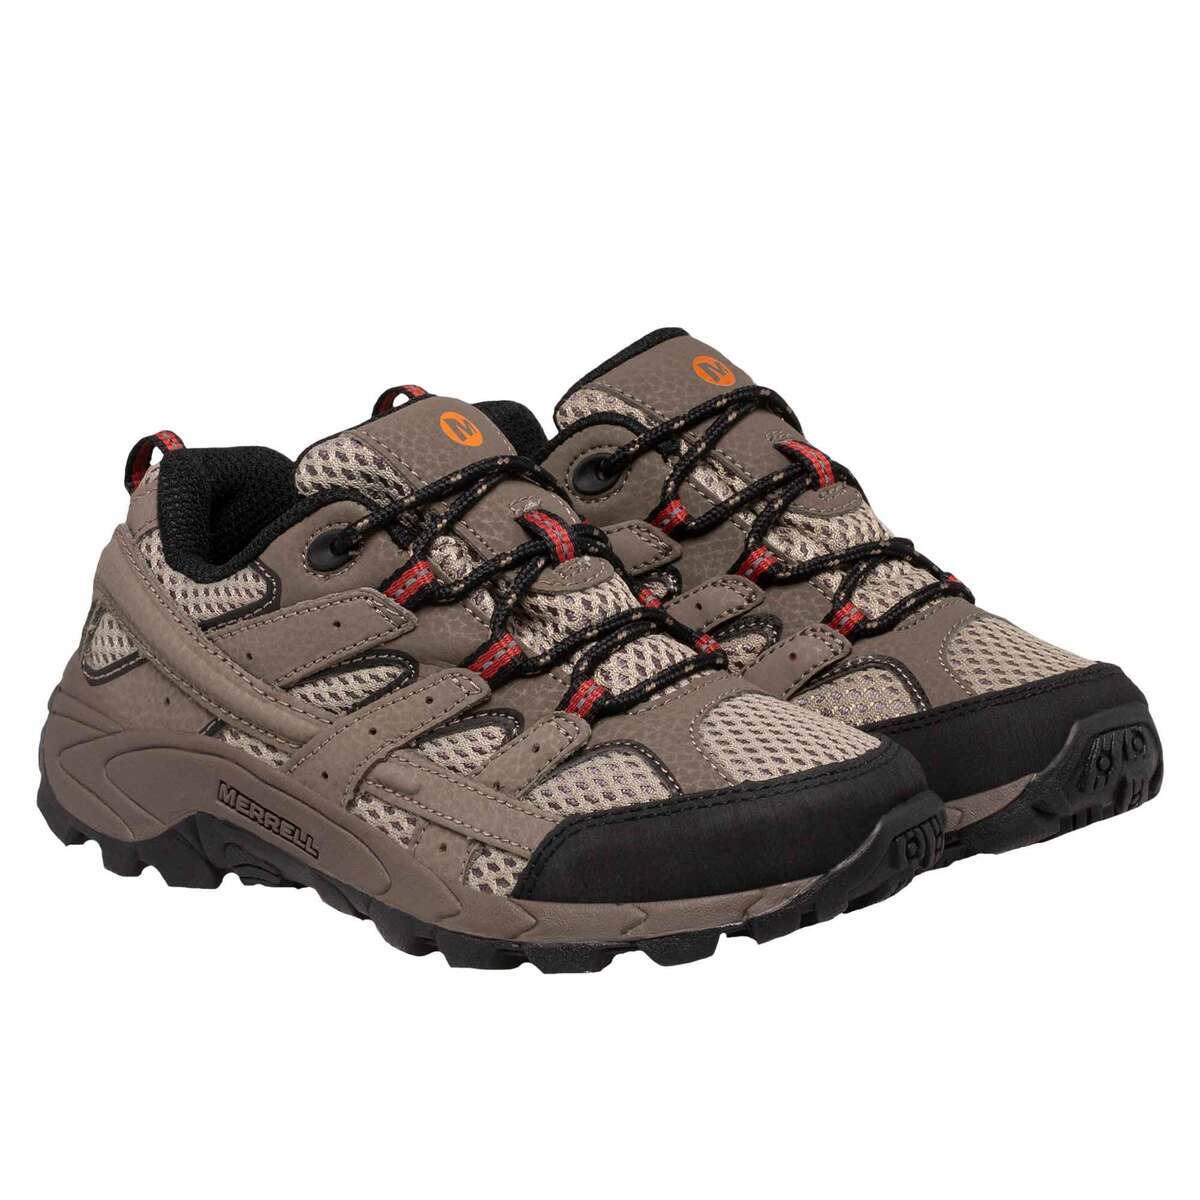 cilia Prædiken Observation Merrell Youth Moab 2 Low Hiking Shoes | Sportsman's Warehouse